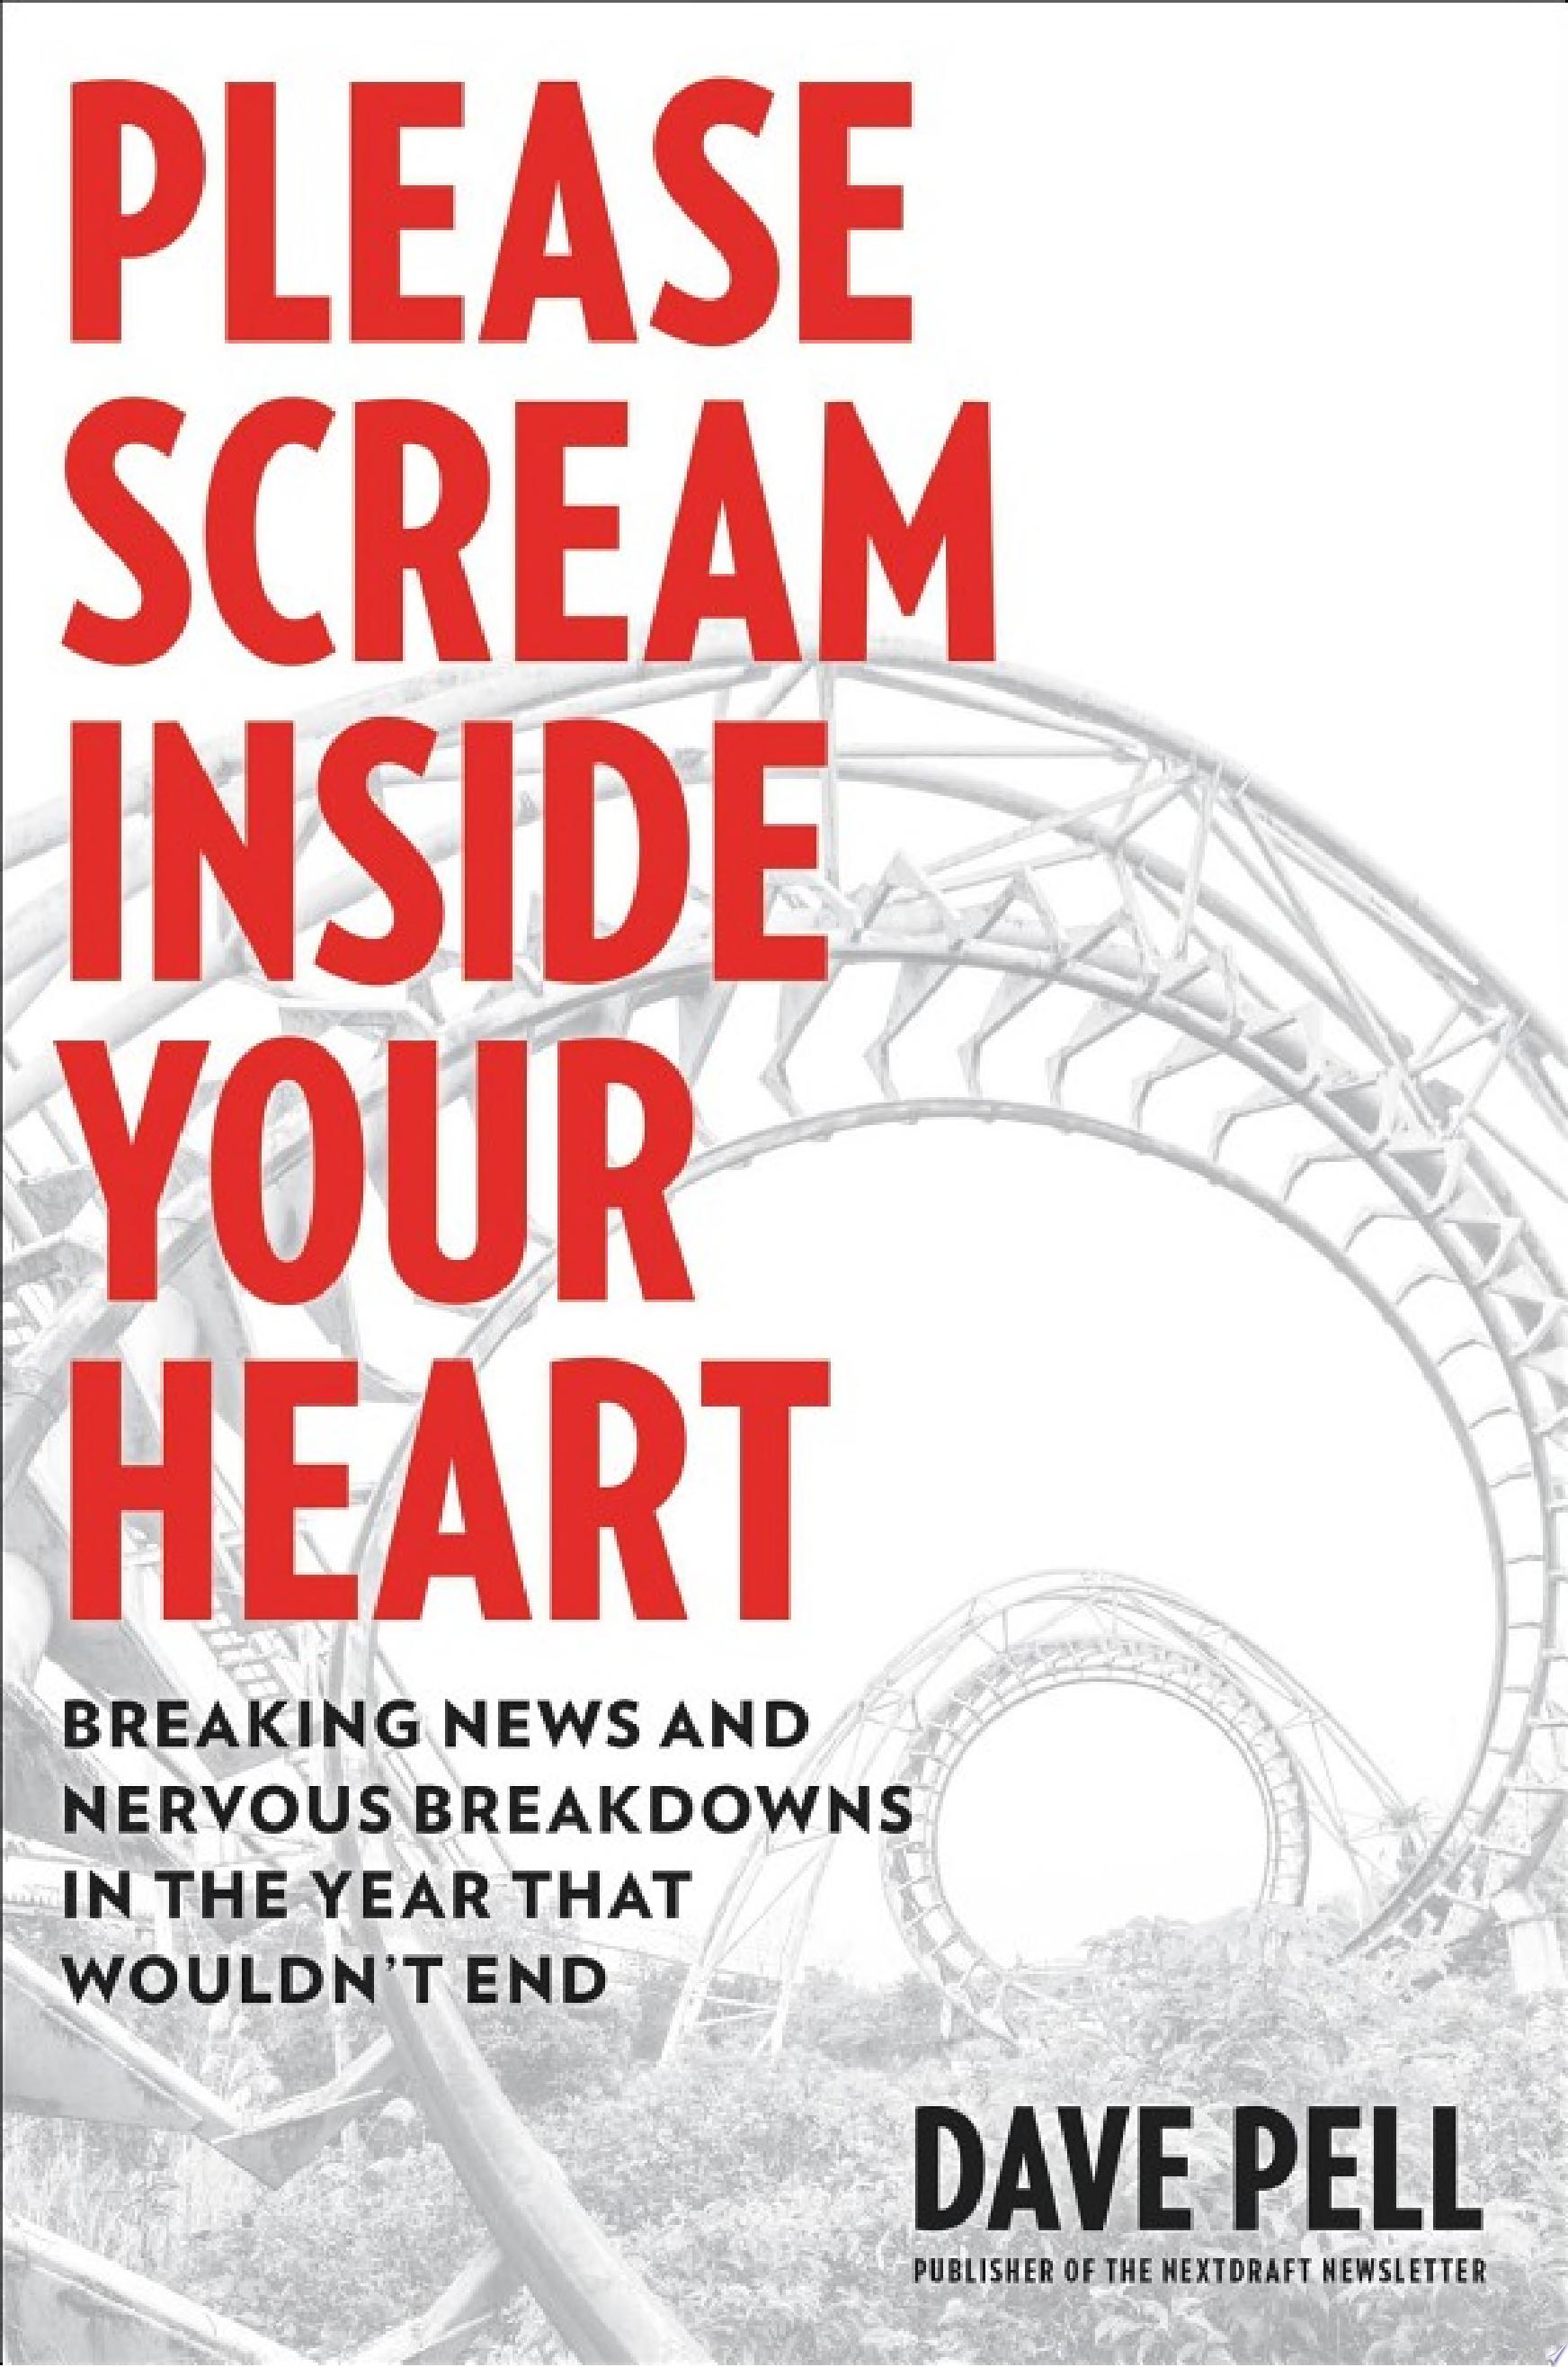 Image for "Please Scream Inside Your Heart"